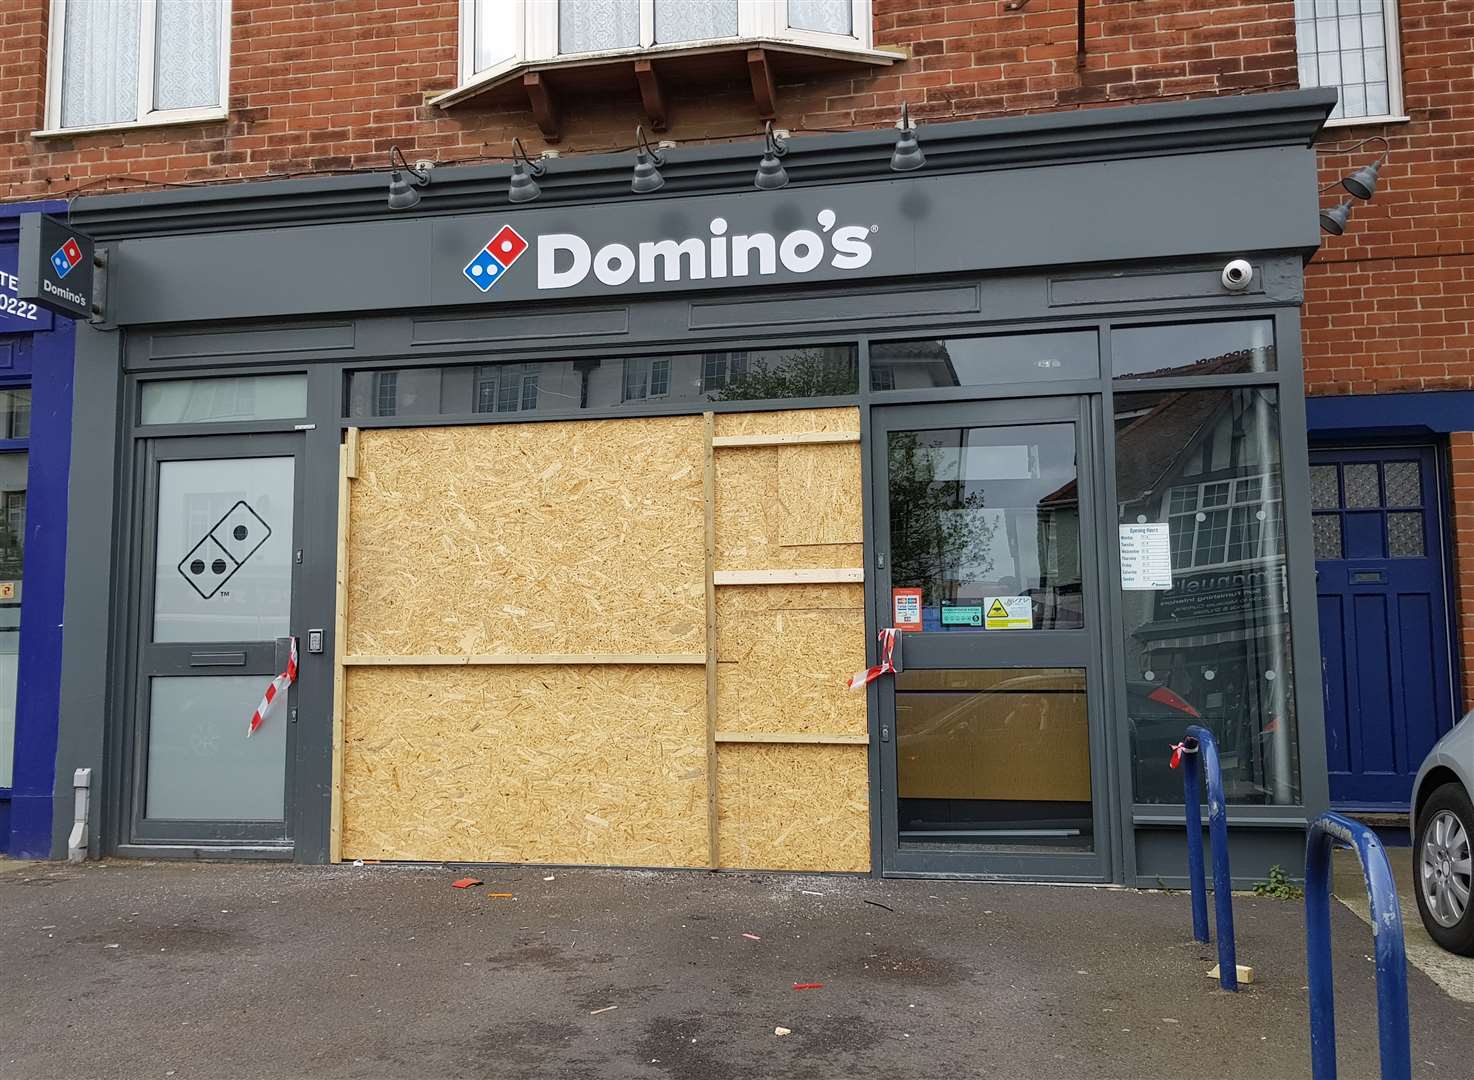 The shop remained boarded up this morning (9241680)